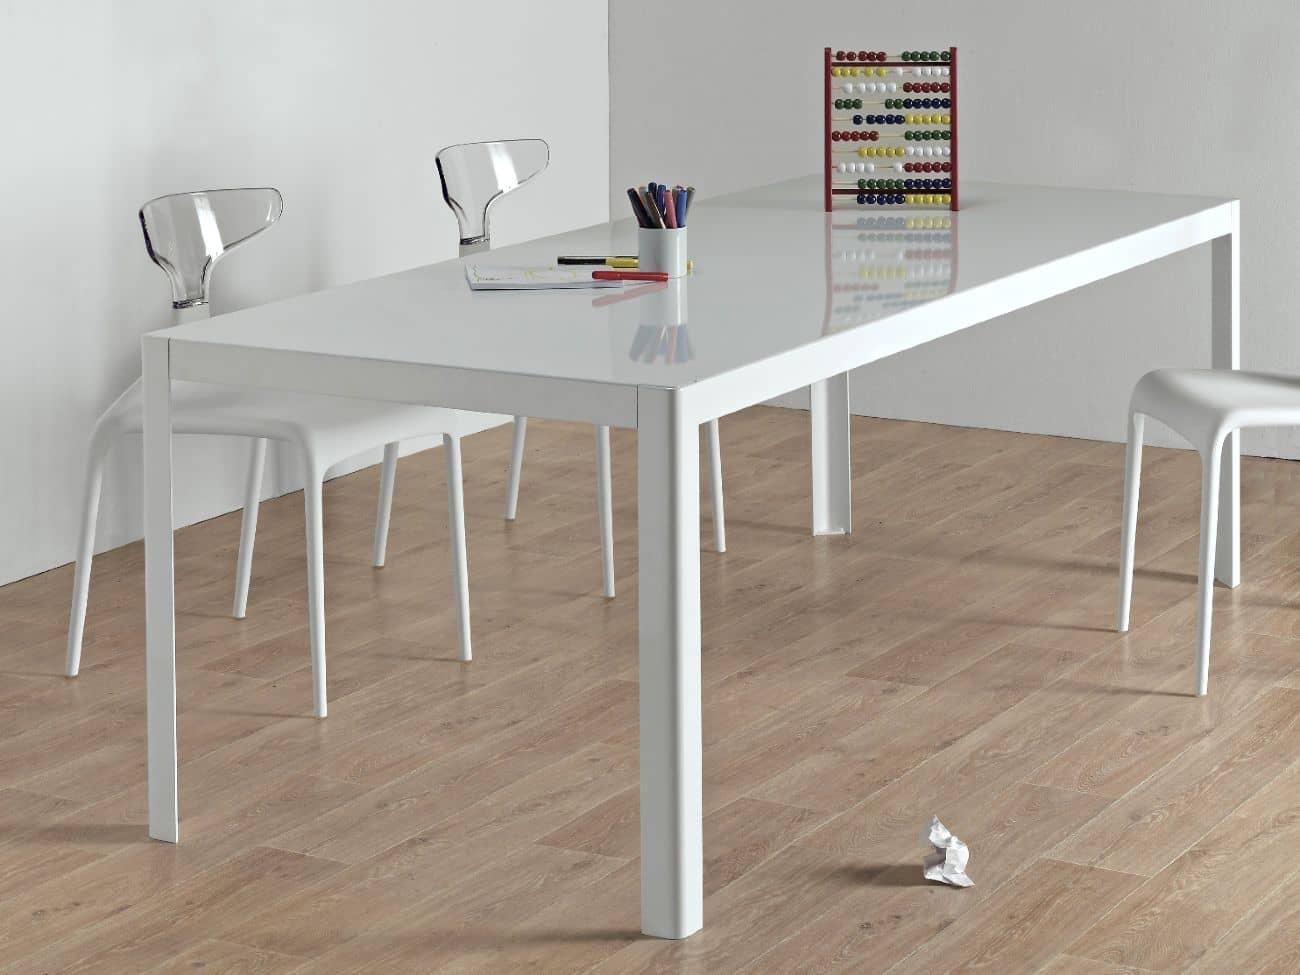 R15 officinanove steel table